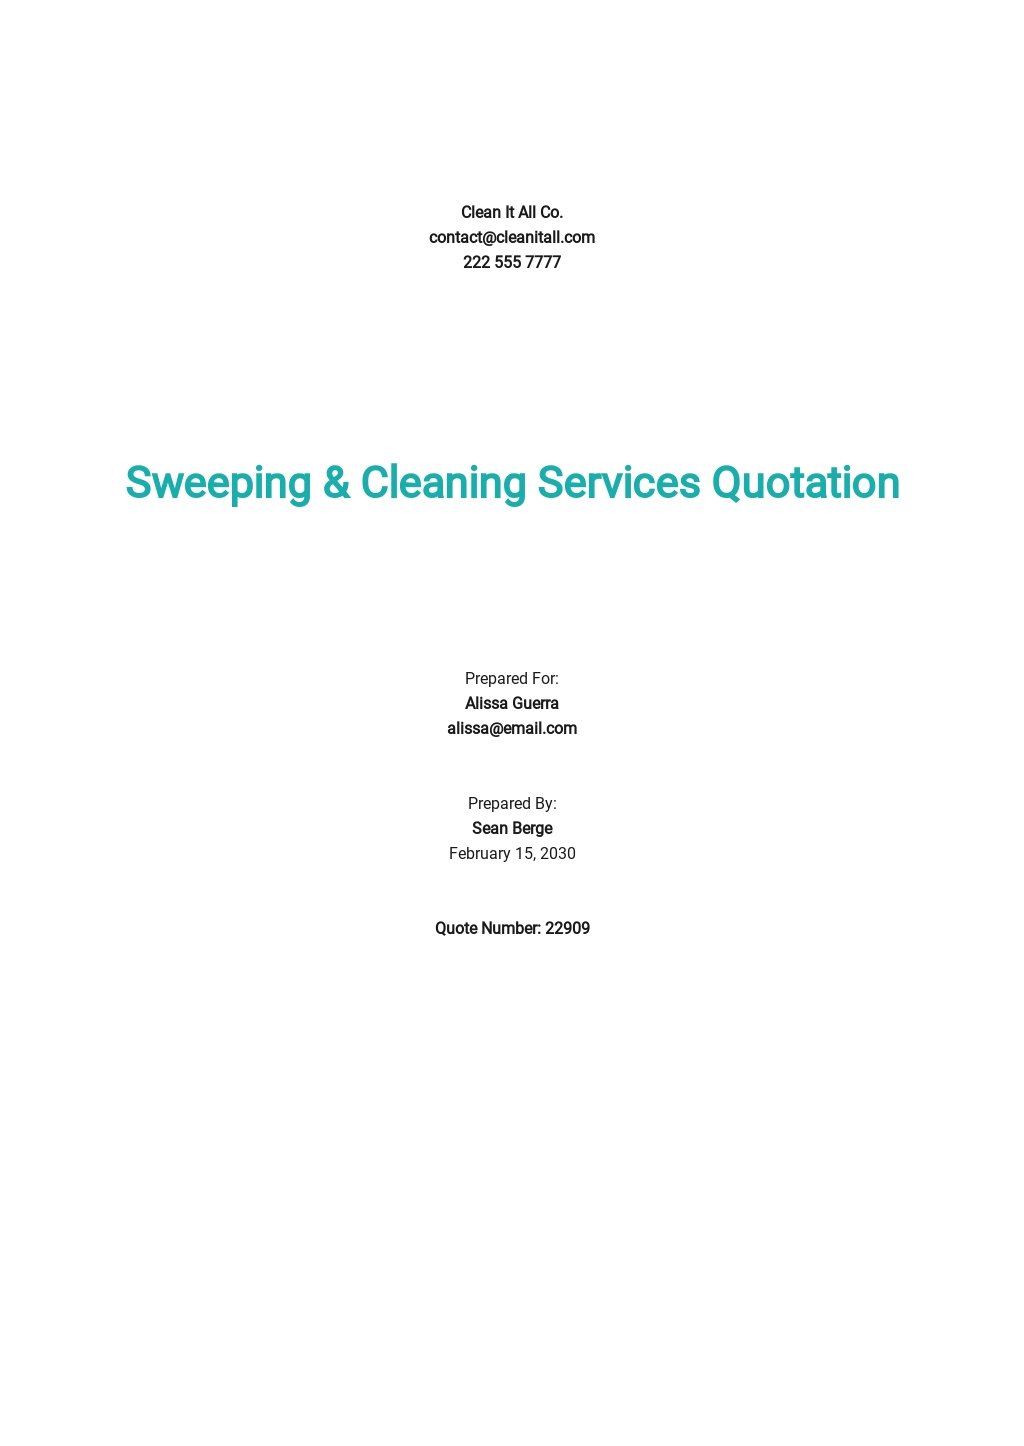 Quotation for Sweeping & Cleaning Services Template.jpe